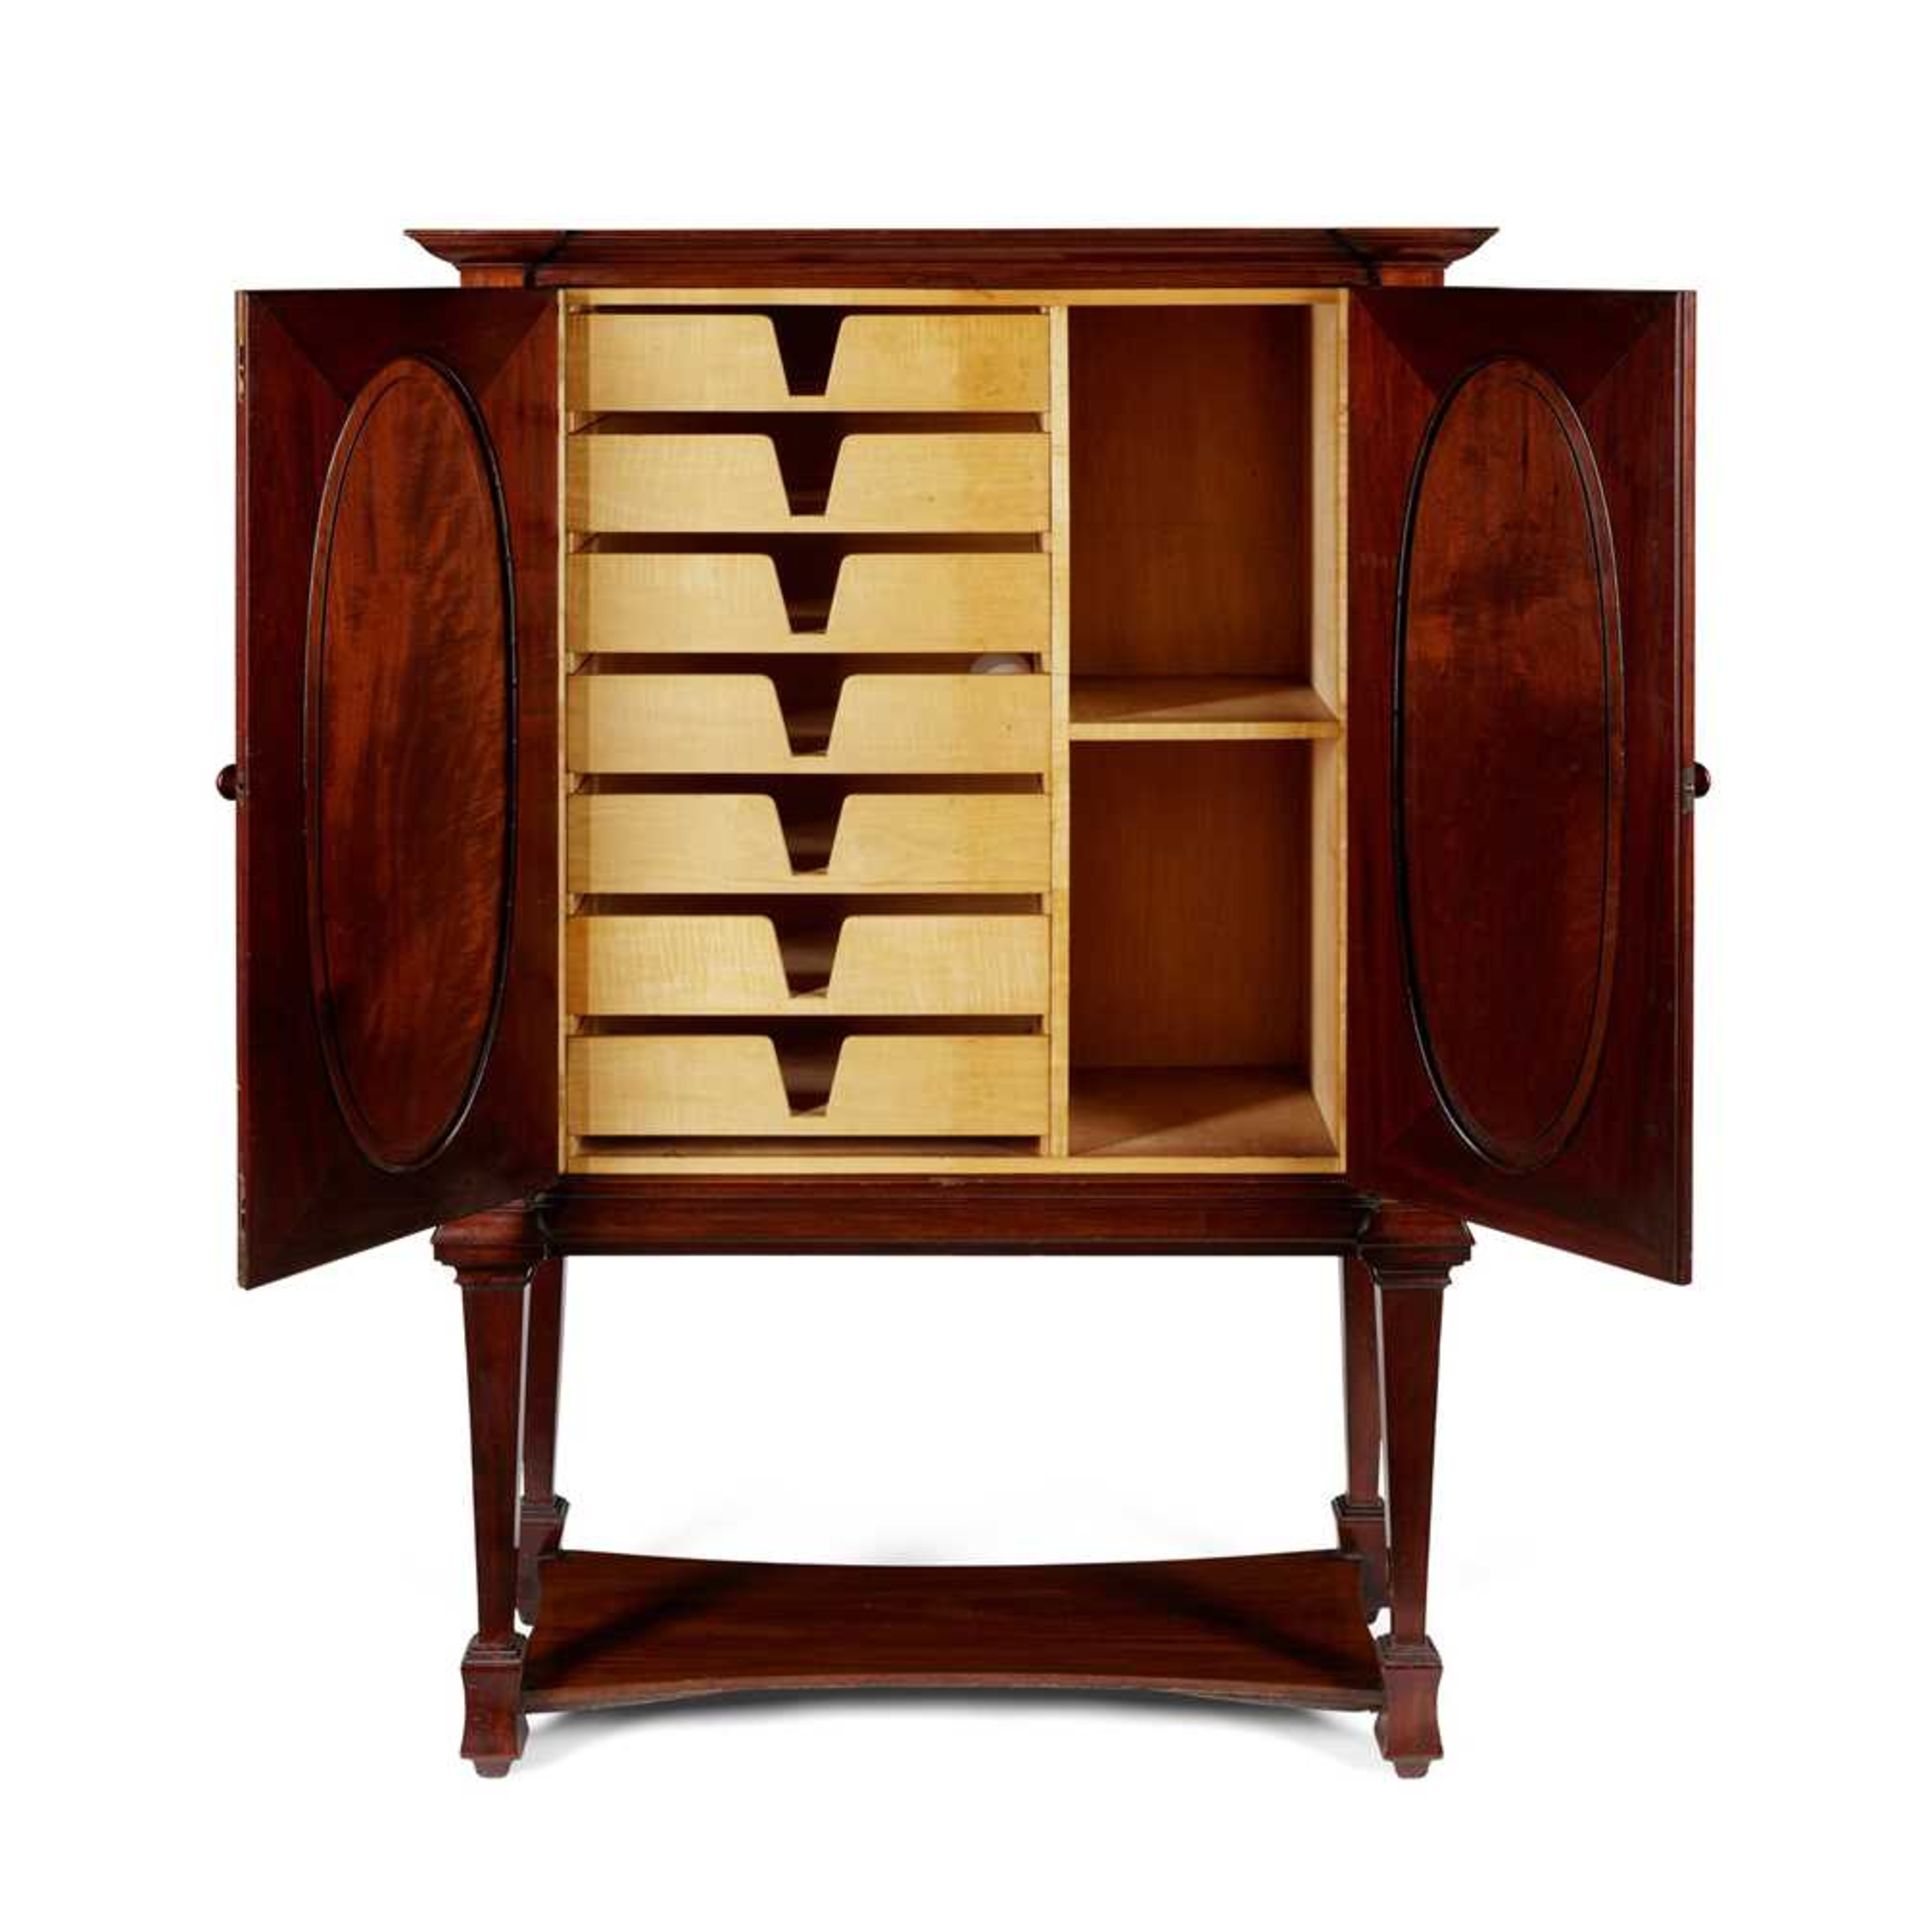 ENGLISH, MANNER OF CHARLES SPOONER DRAWING ROOM CABINET, CIRCA 1910 - Image 2 of 2